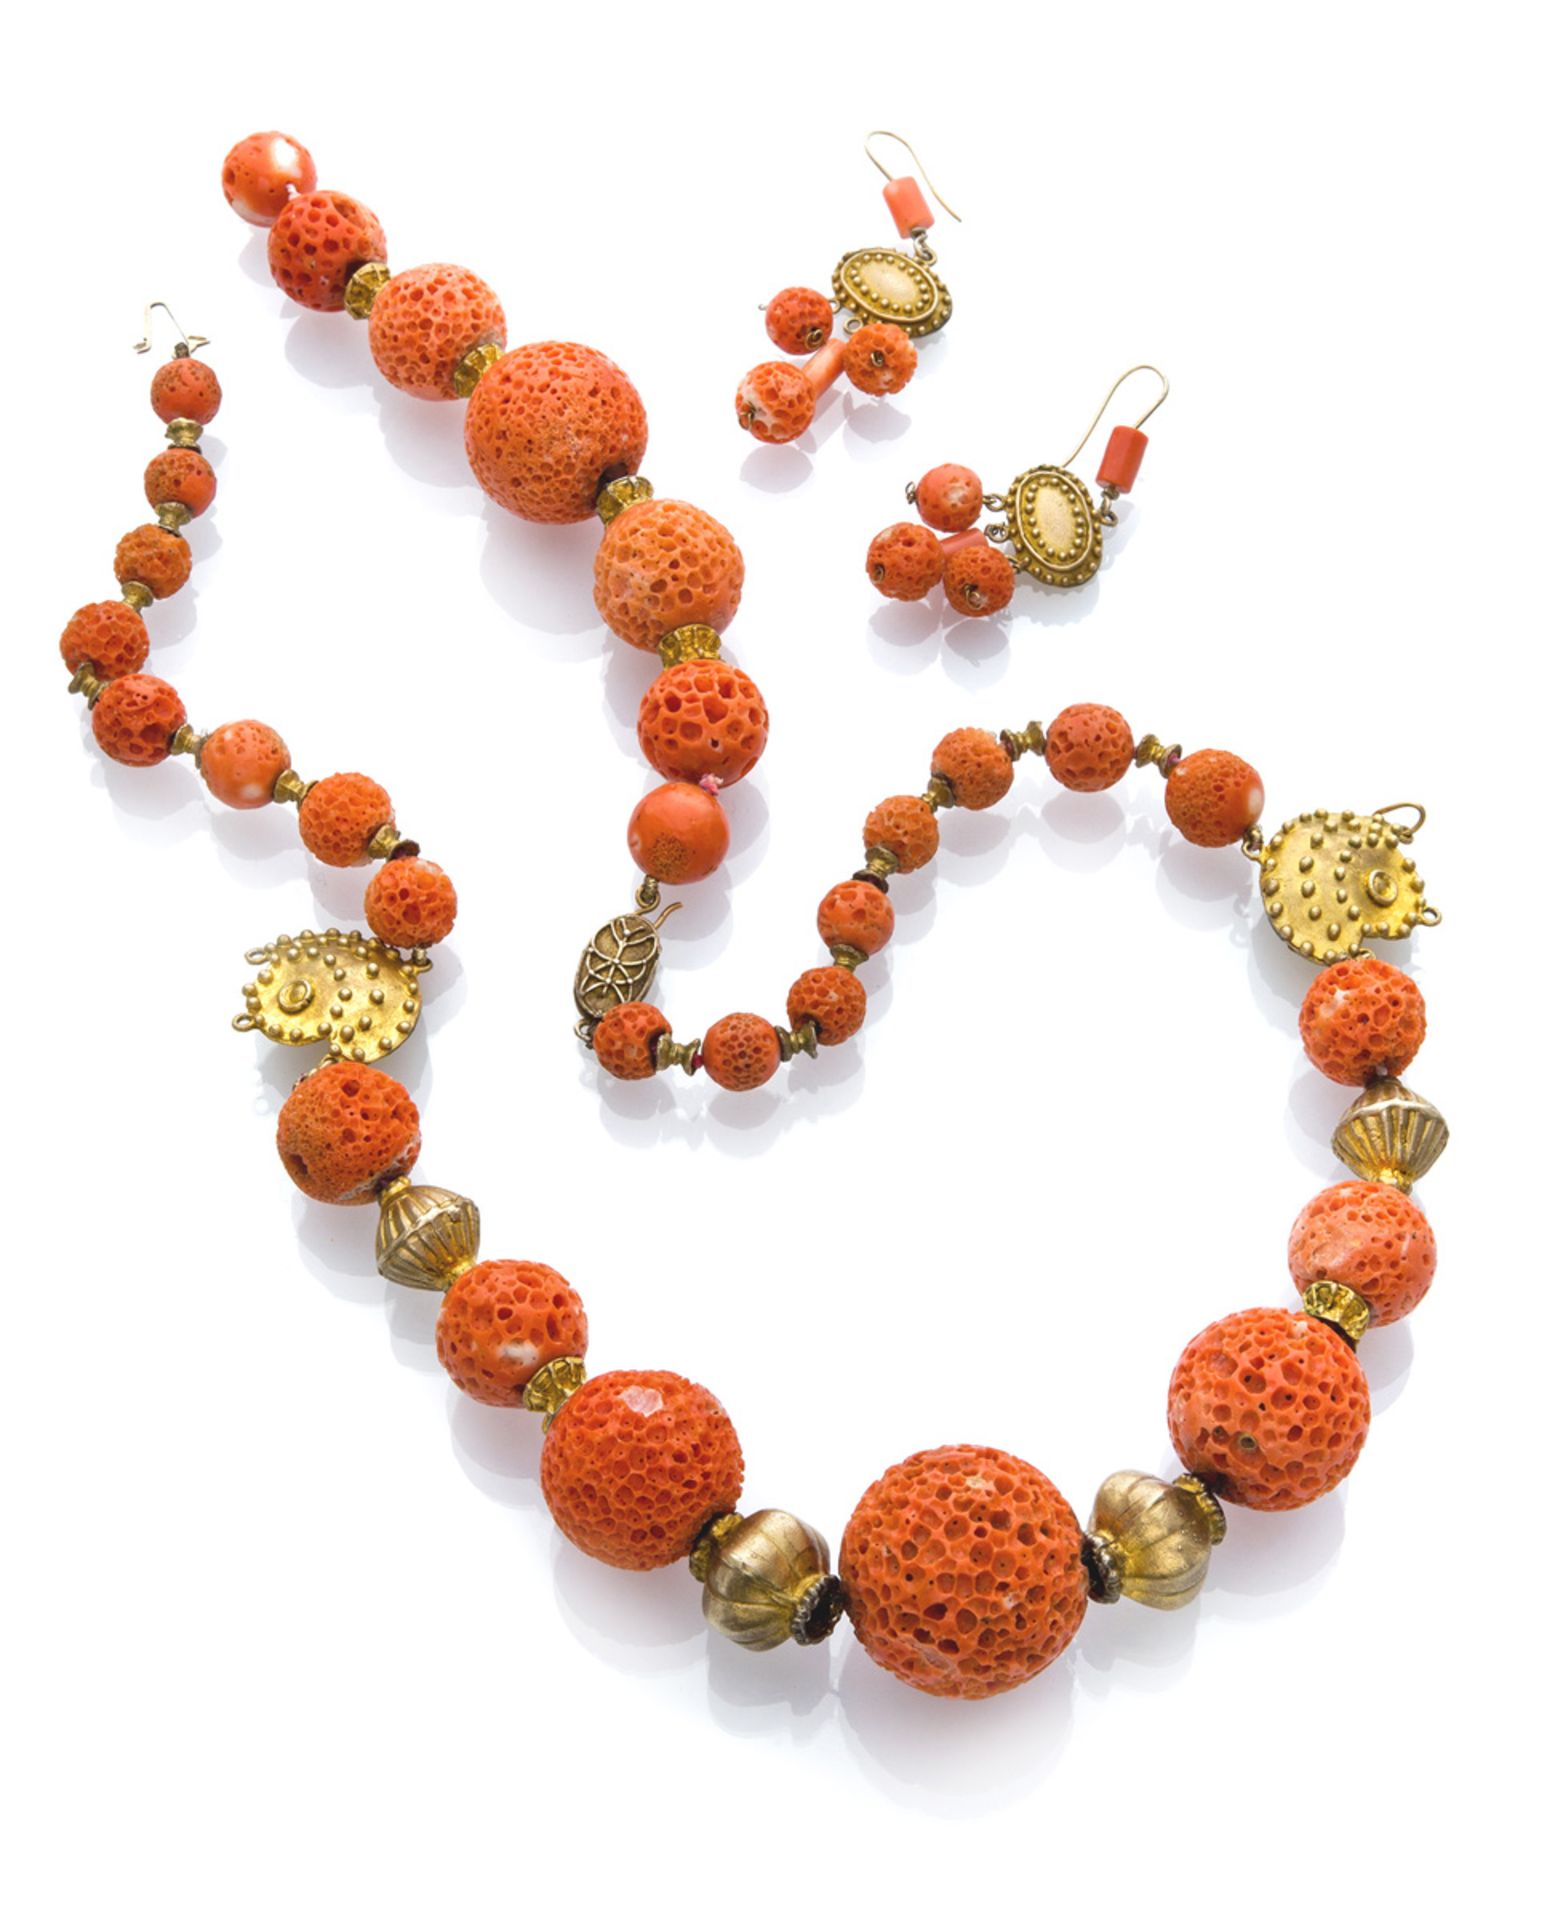 PARURE OF EARRINGS AND NECKLACE with spongy coral spheres alternated by elements in gilded metal.